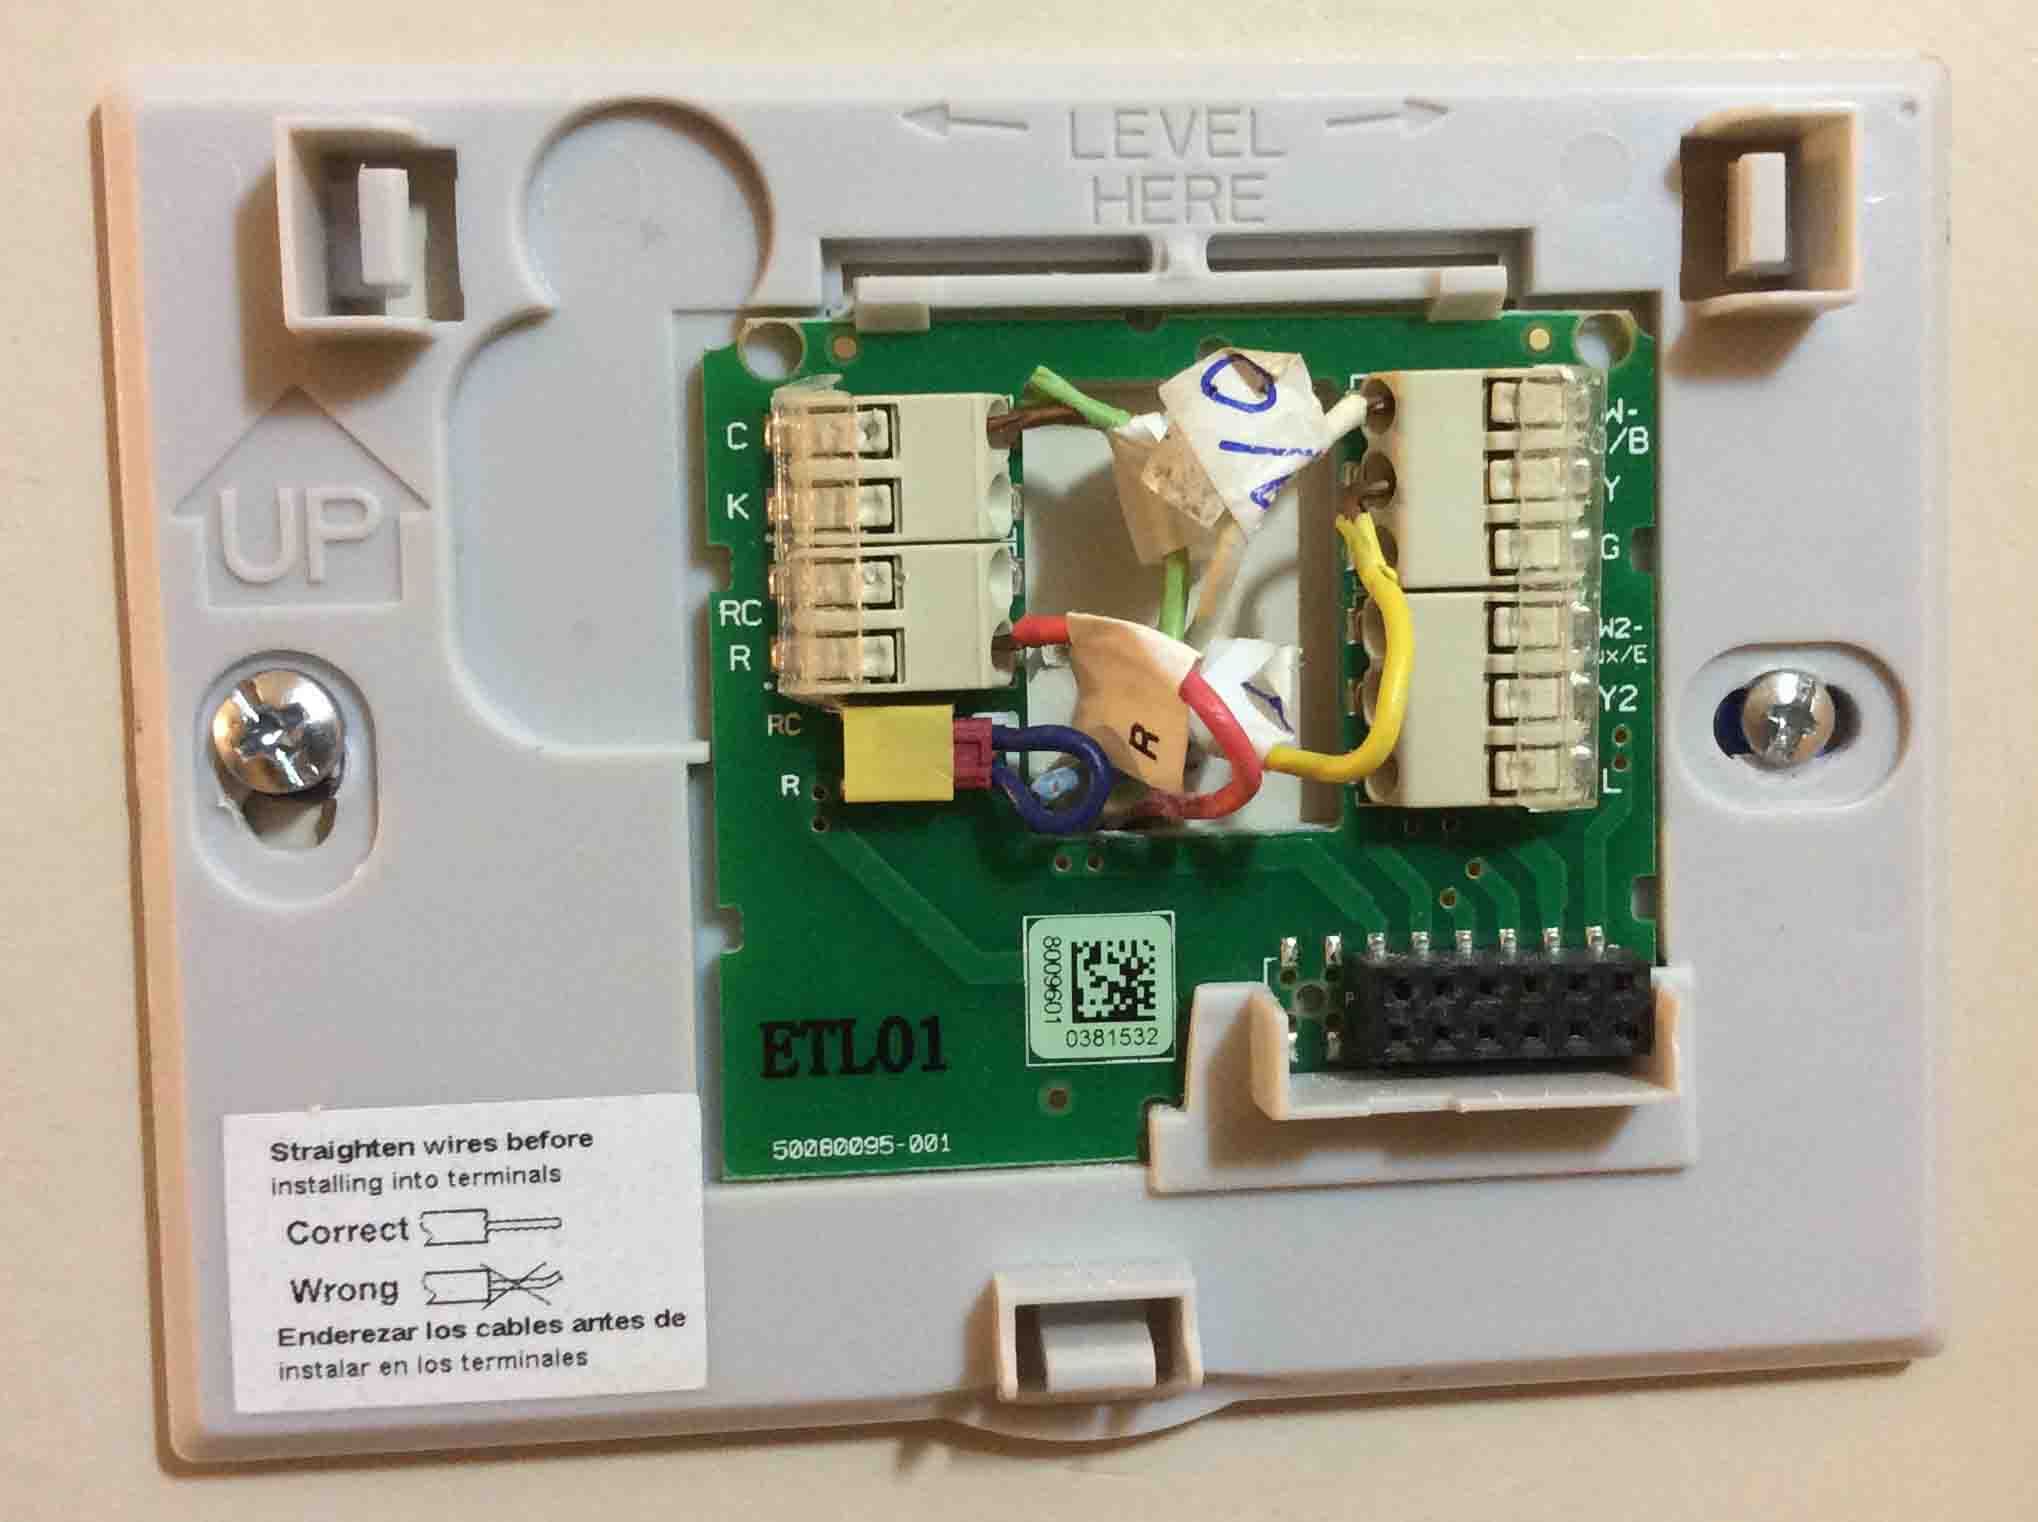 4 Wire Thermostat Wiring Color Code